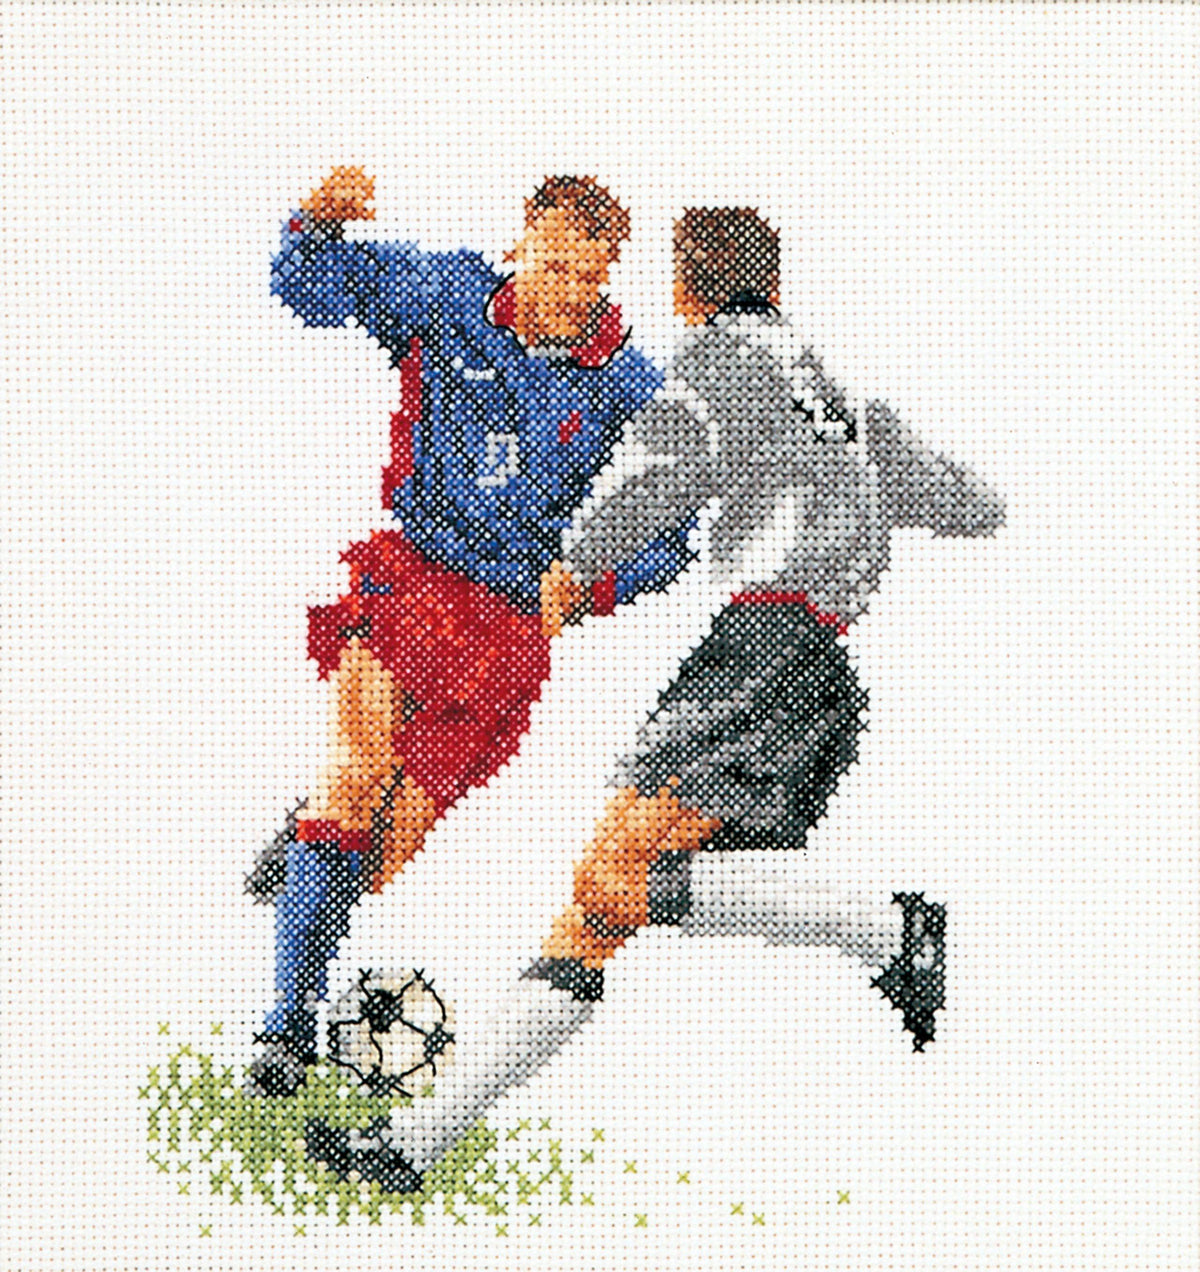 Thea Gouverneur - Counted Cross Stitch Kit - Football - Aida - 18 count - 3030A - Thea Gouverneur Since 1959